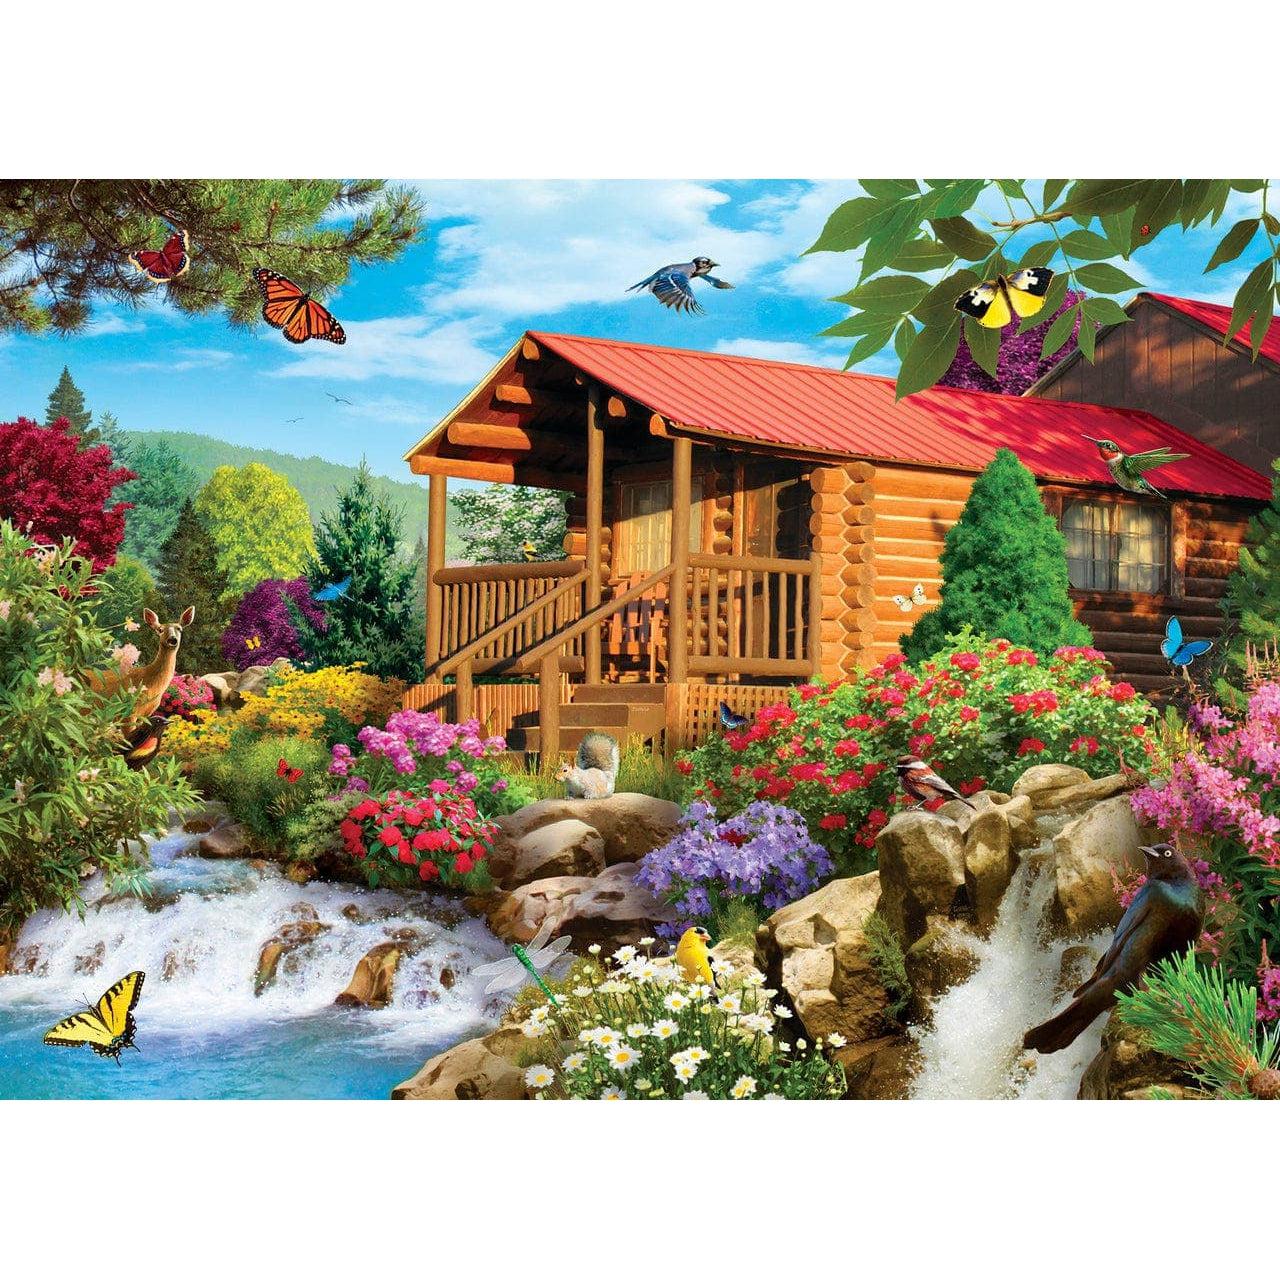 MasterPieces-Time Away - Cascading Cabin - 1000 Piece Puzzle-72041-Legacy Toys